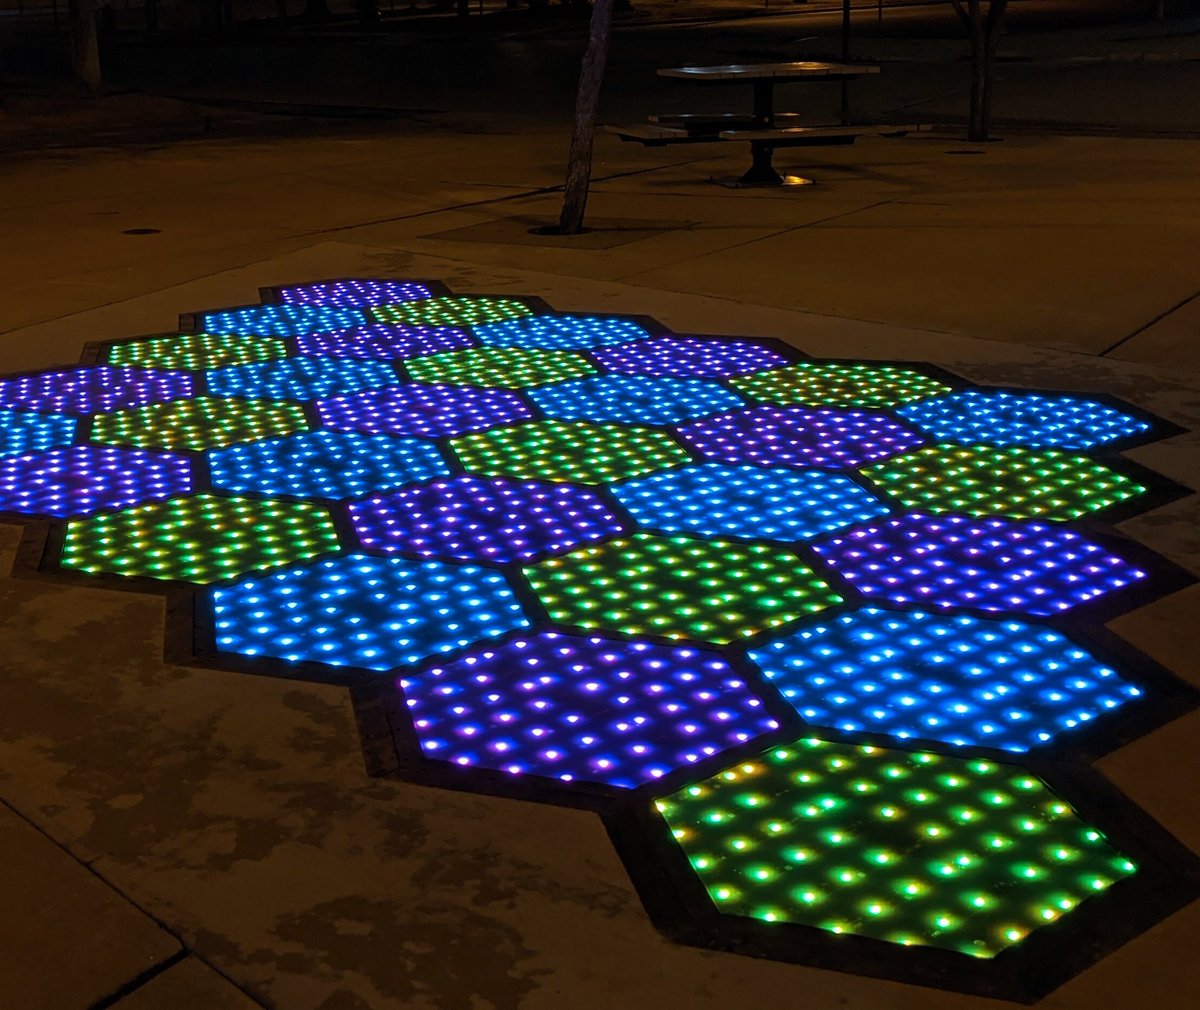 When we first invented #SolarRoadways, we were focused on the #environment, and underestimated the enthusiasm there would be to use #SolarRoadPanels also for #holidaydecorating and #entertaining .

For our free Newsletter: Newsletters@SolarRoadway.com